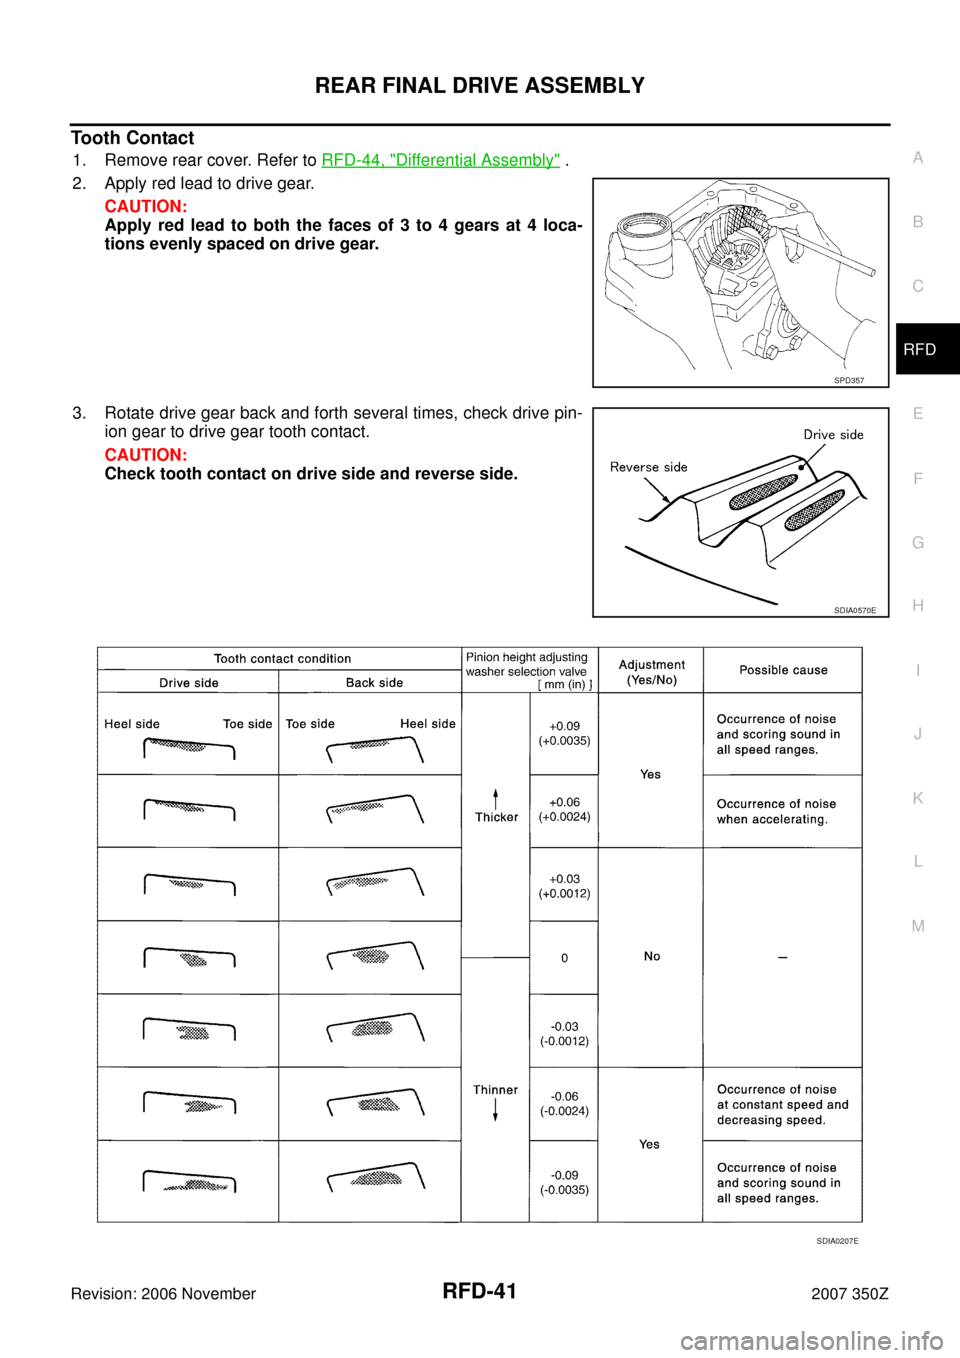 NISSAN 350Z 2007 Z33 Rear Final Drive Service Manual REAR FINAL DRIVE ASSEMBLY
RFD-41
C
E
F
G
H
I
J
K
L
MA
B
RFD
Revision: 2006 November2007 350Z
Tooth Contact
1. Remove rear cover. Refer to RFD-44, "Differential Assembly" .
2. Apply red lead to drive g